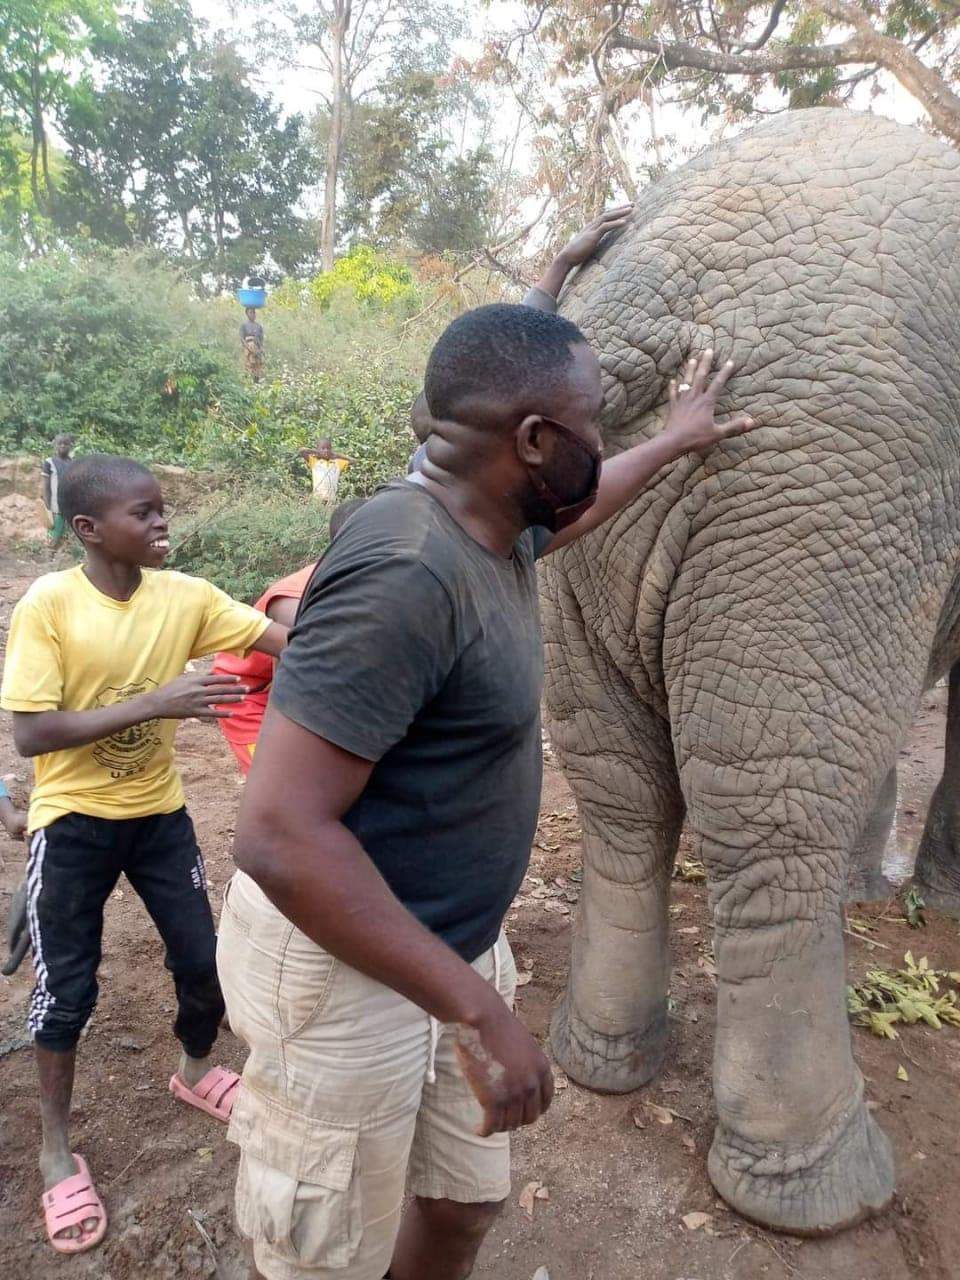 PHOTOS: Elephant Spotted By Farmers In Oyo State